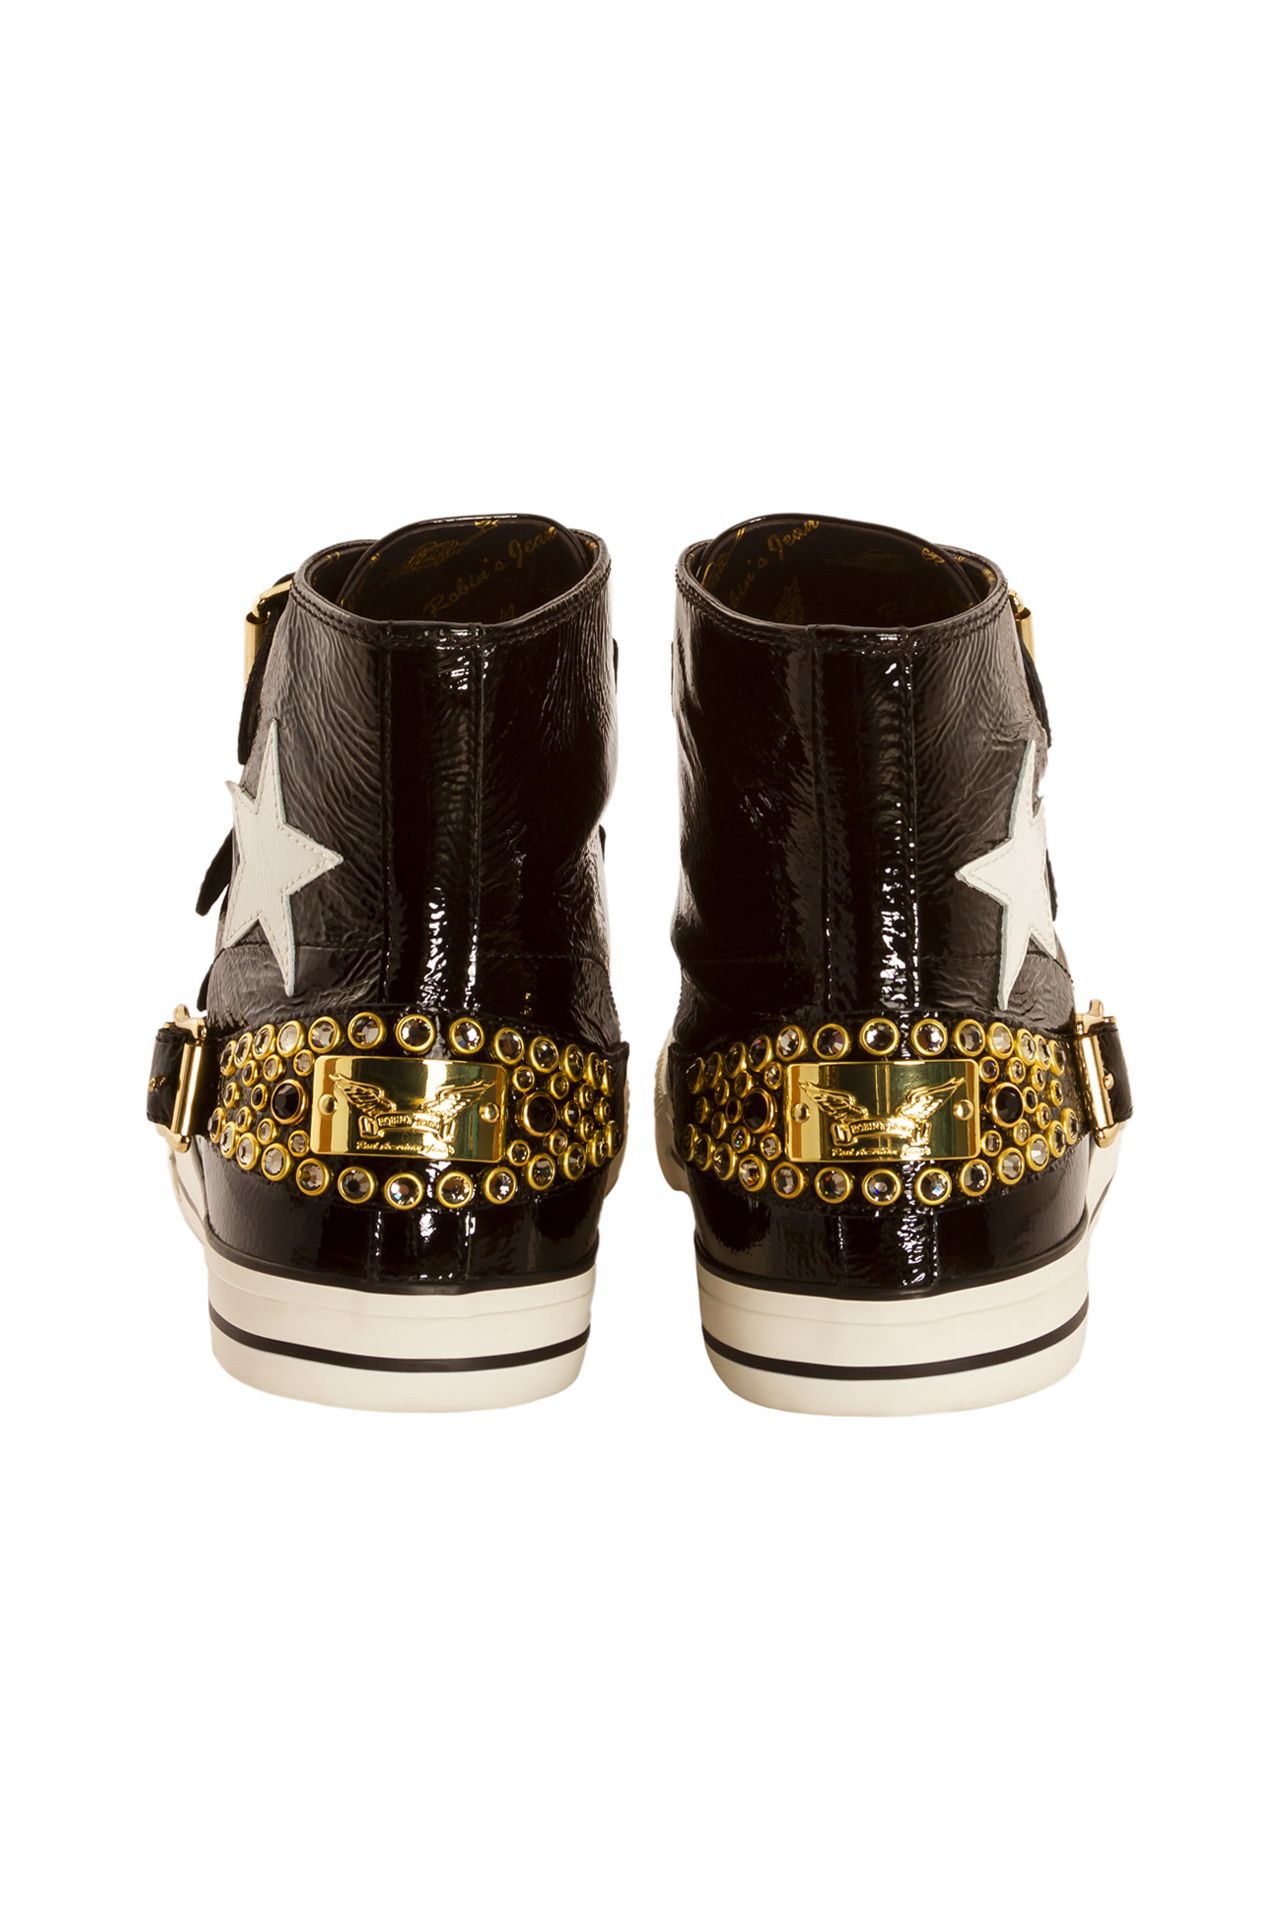 TEAM ROBIN HIGH TOP IN BLACK W/ CRYSTALS